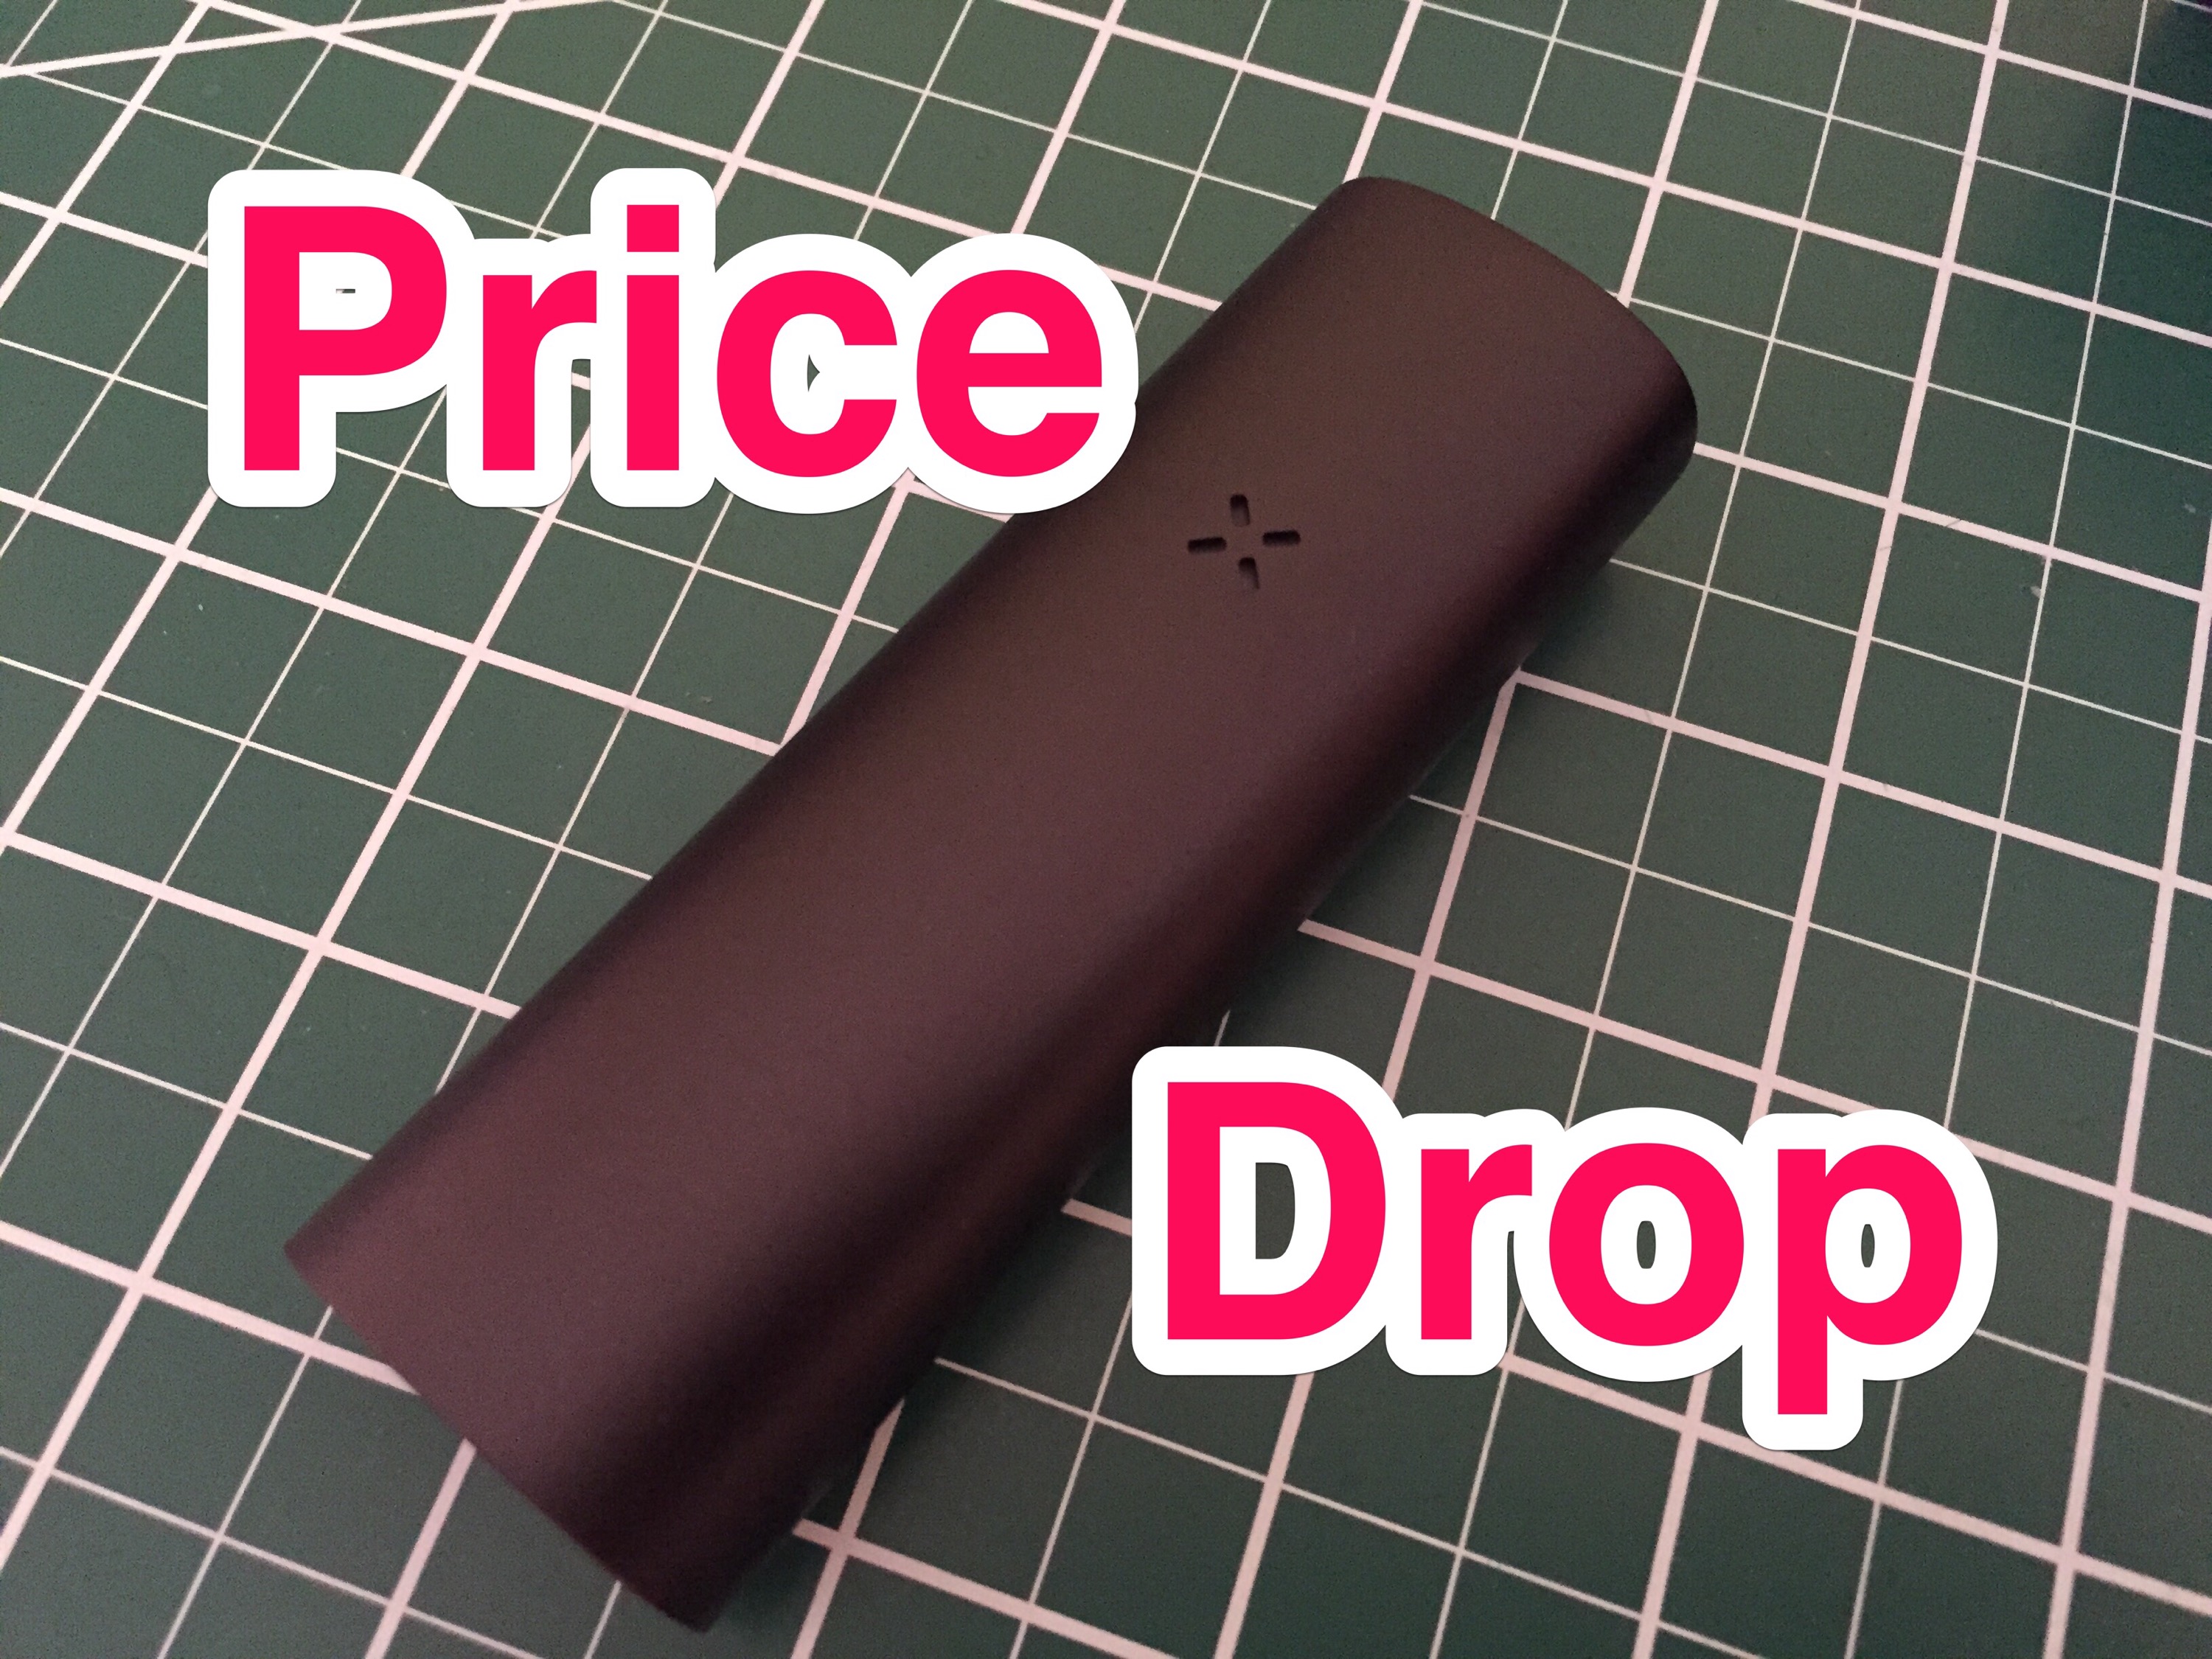 Pax price drop is here. Which can only mean one thing…